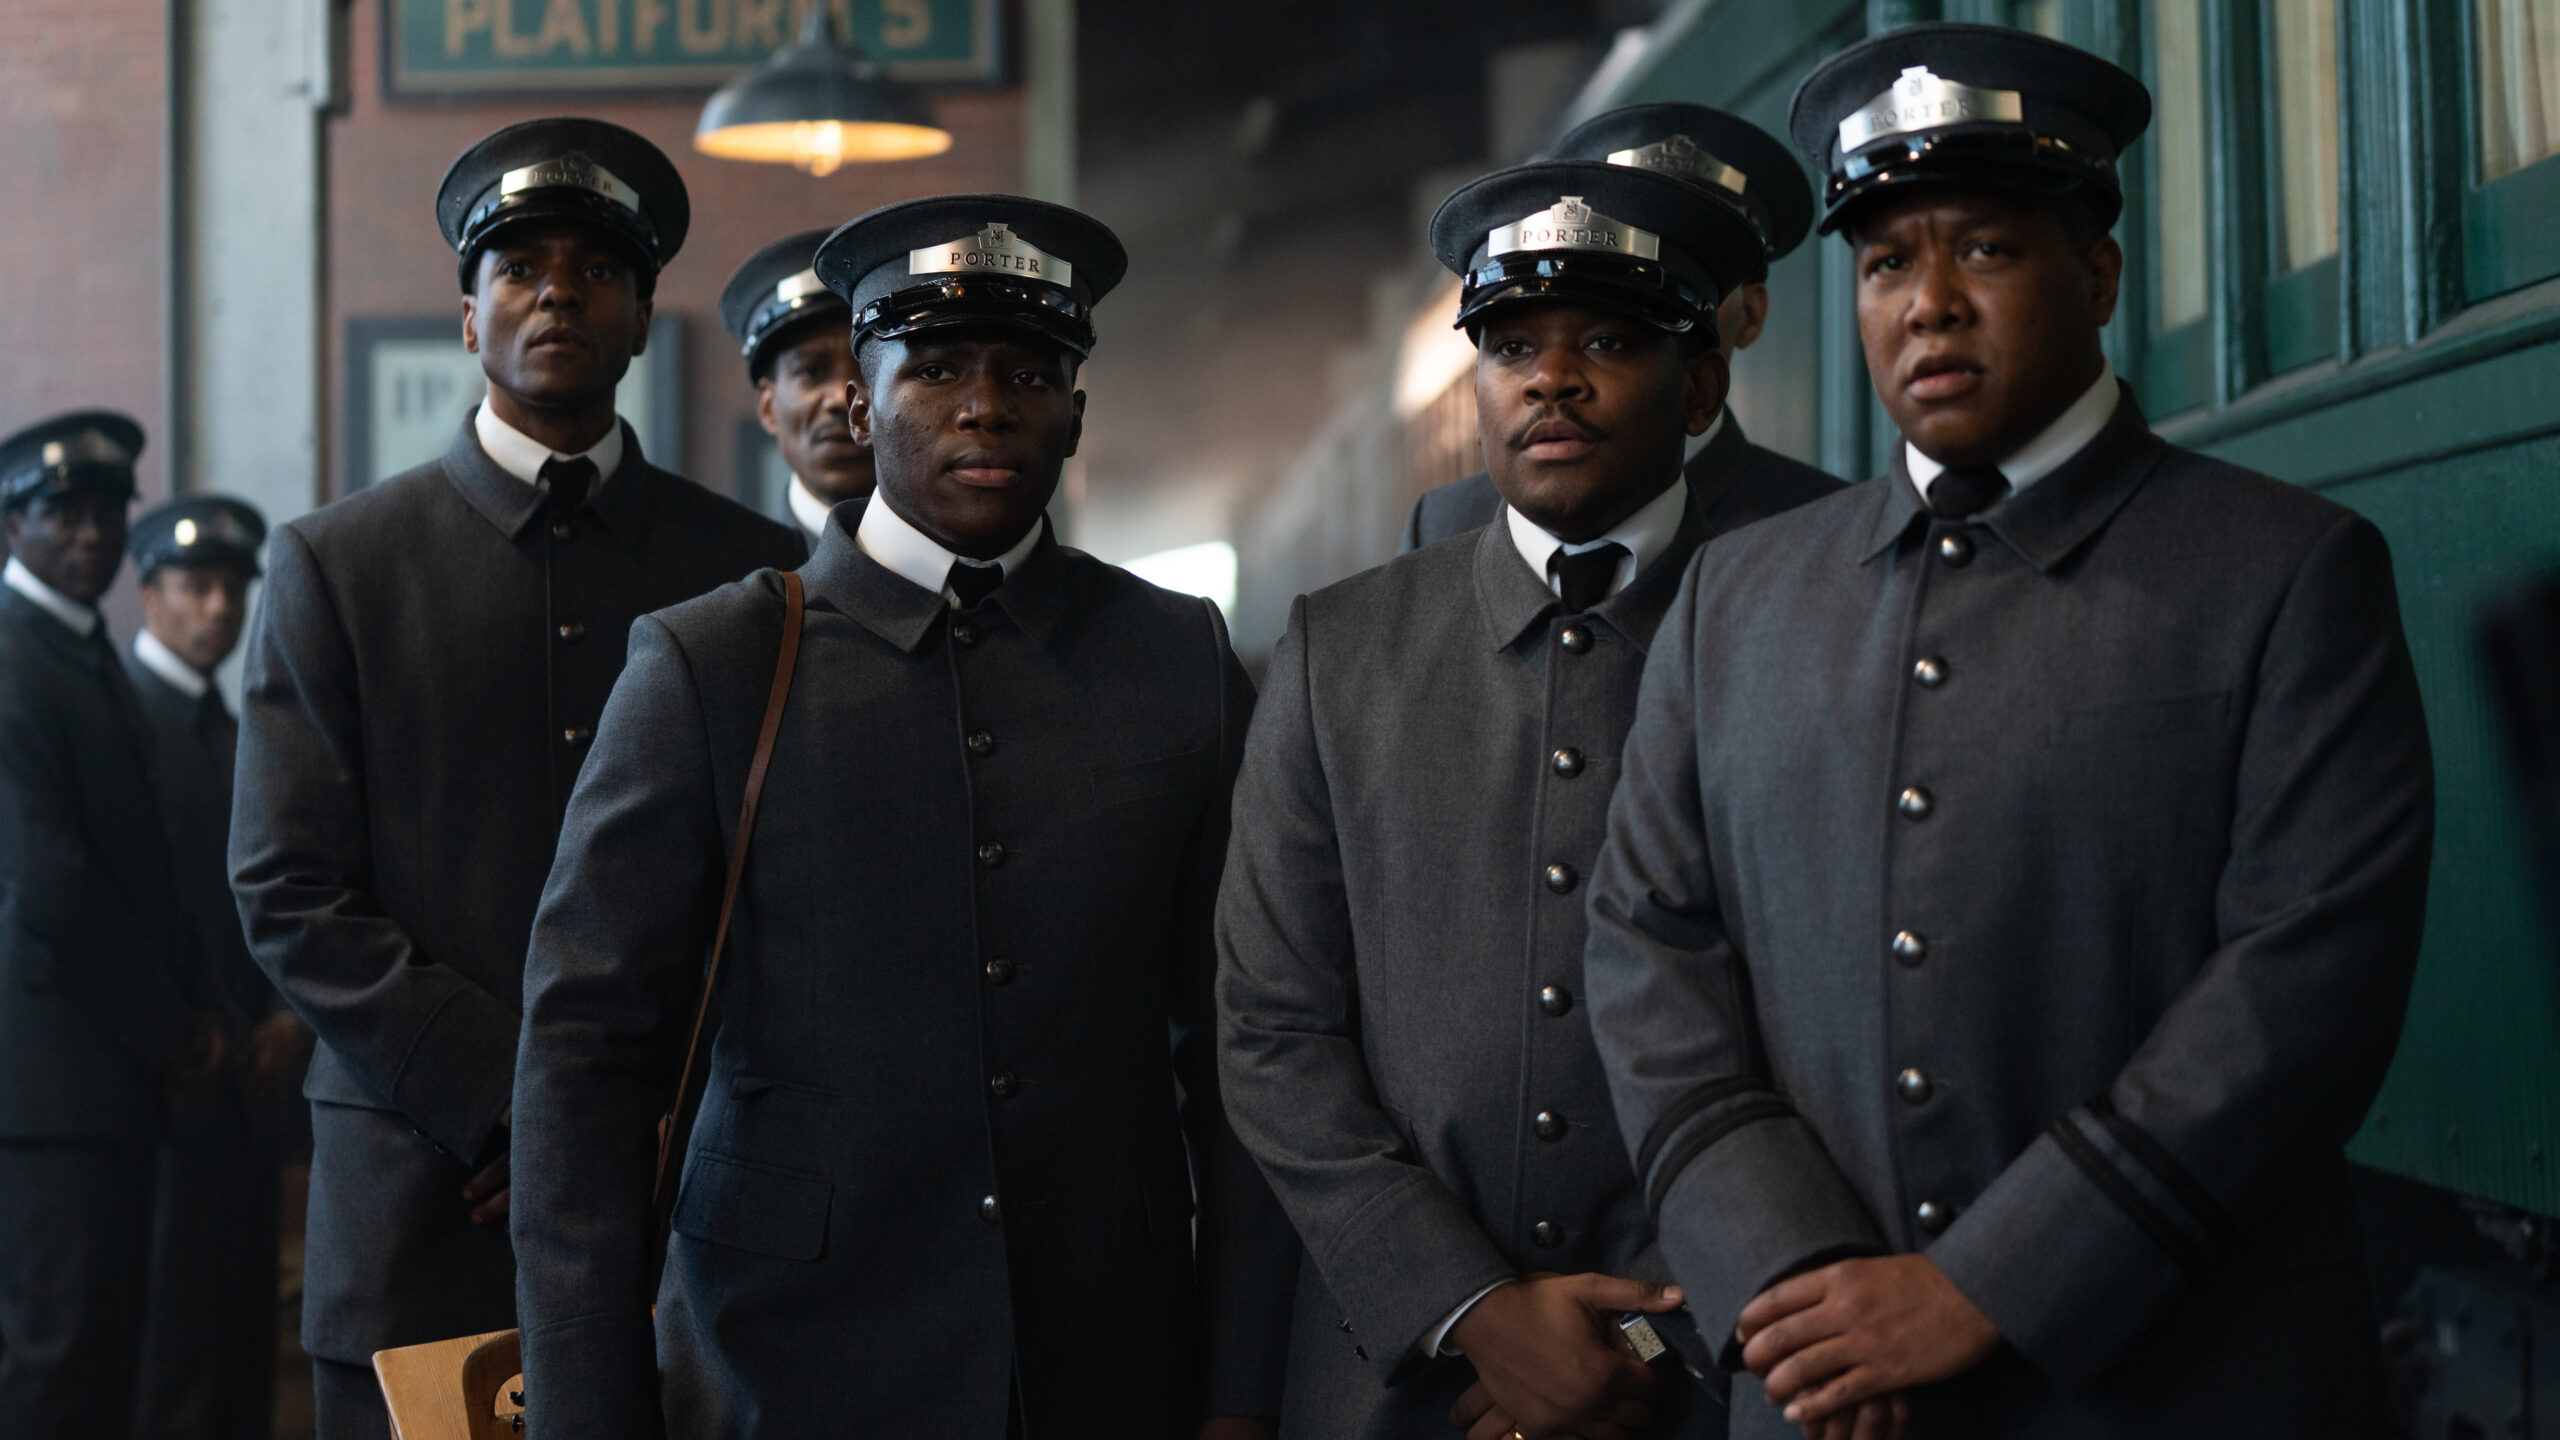 Two Black men in Porter uniforms stand in front of a train. Additional porters in the background.